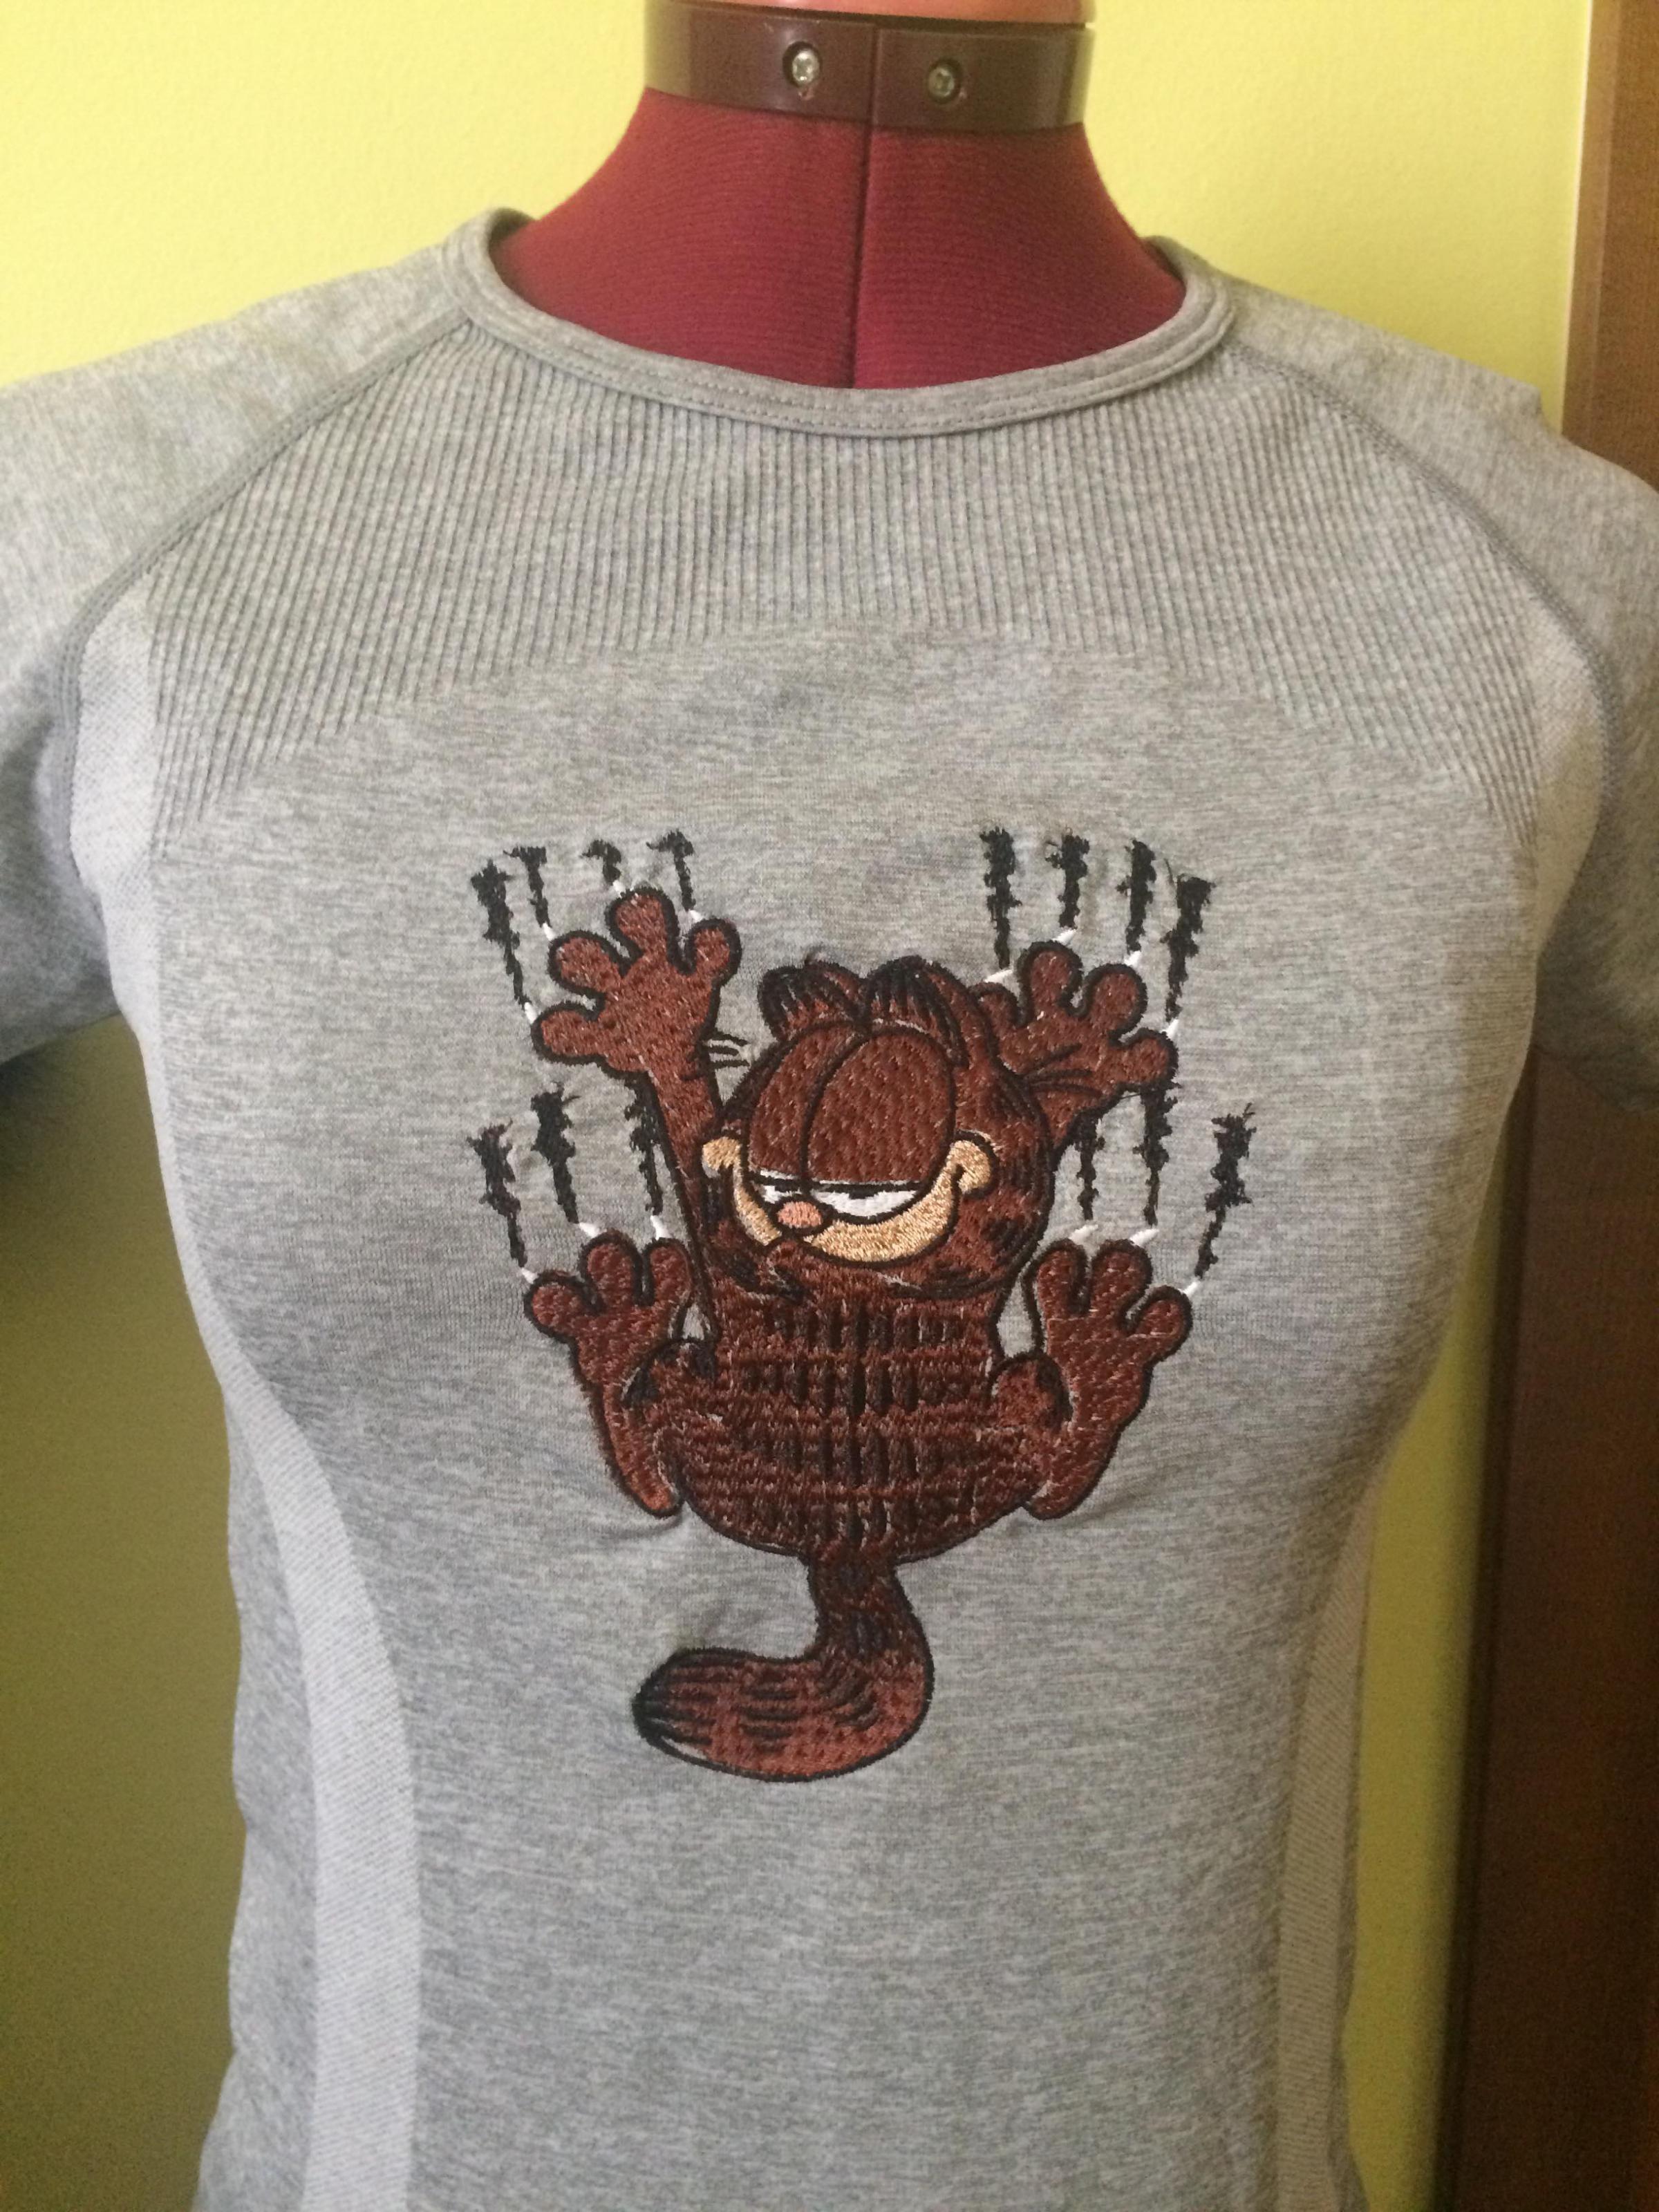 Embroidered shirt with Garfield free design